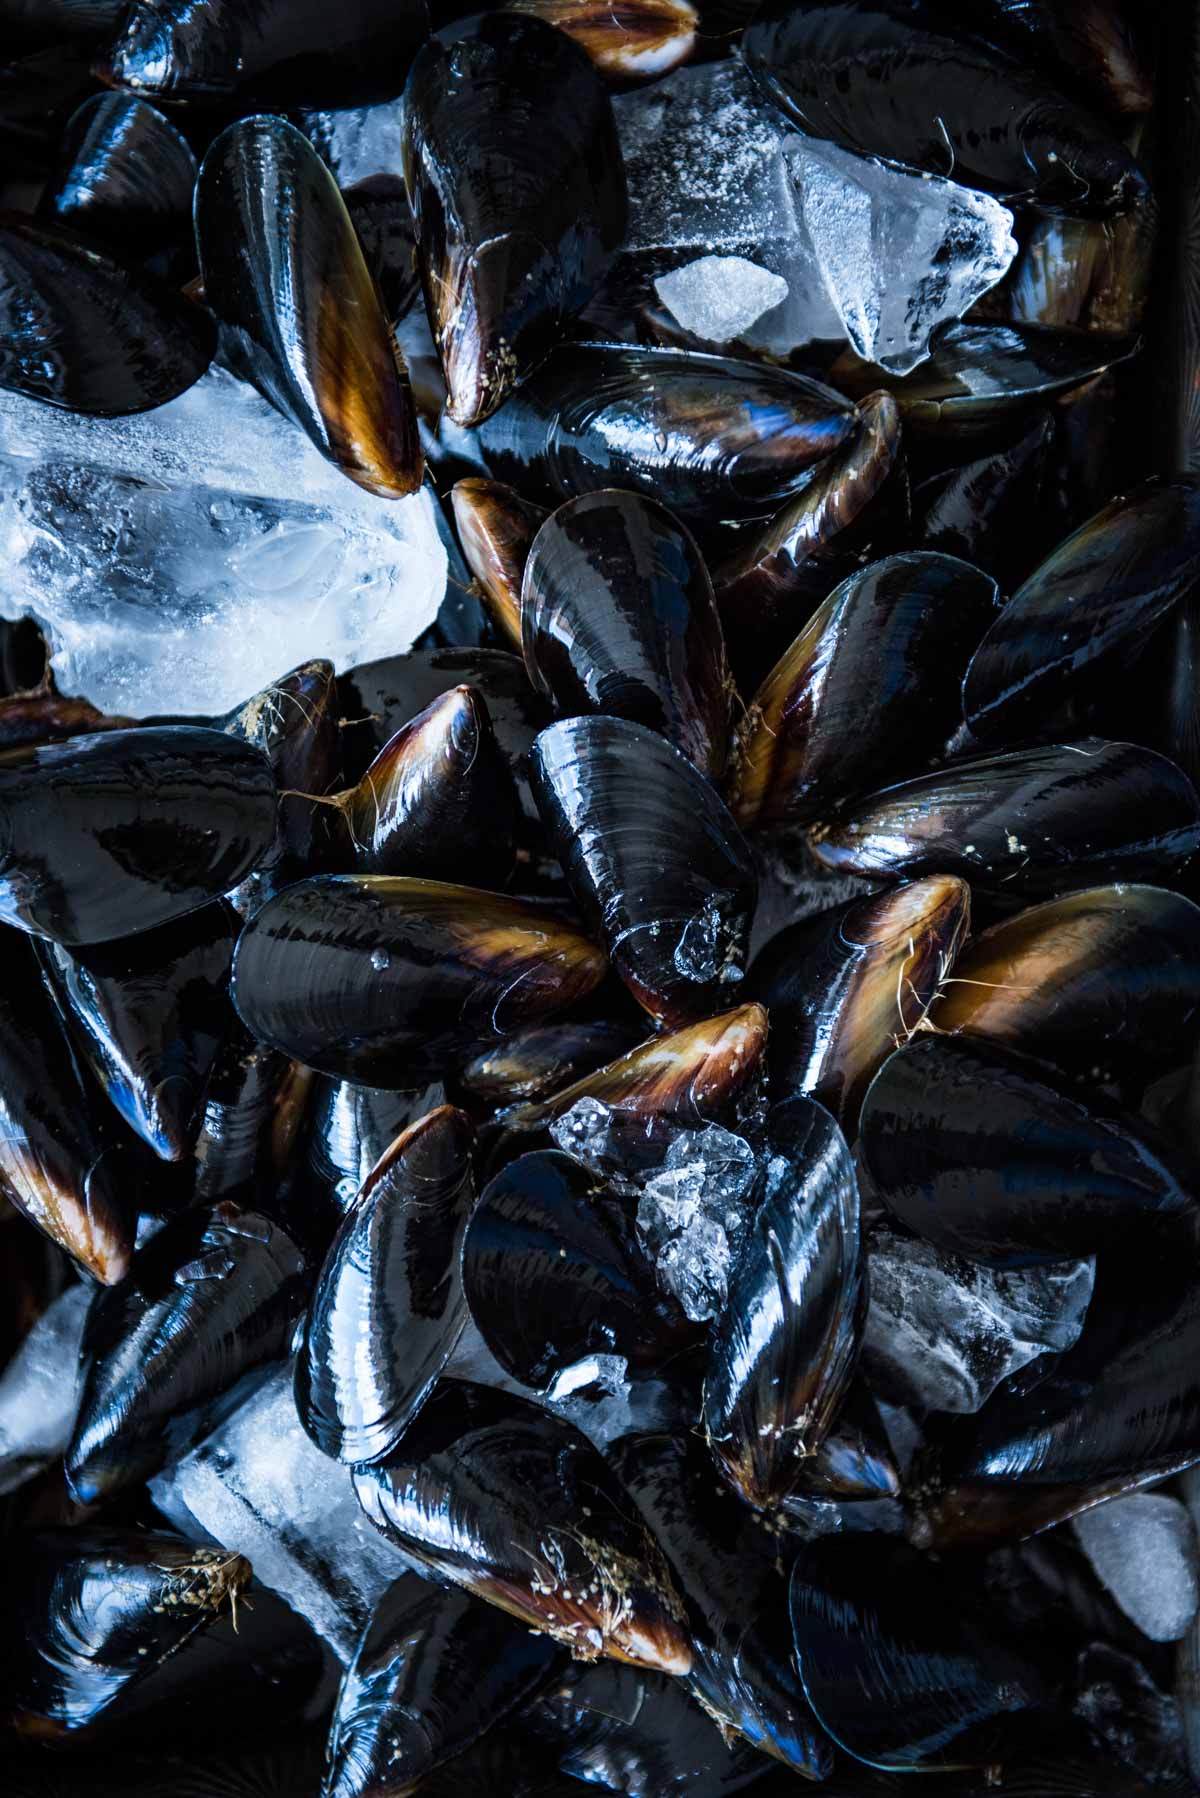 Butter and White Wine Mussels with Lemon and Snow Pea Sprouts | Chew Town Food Blog